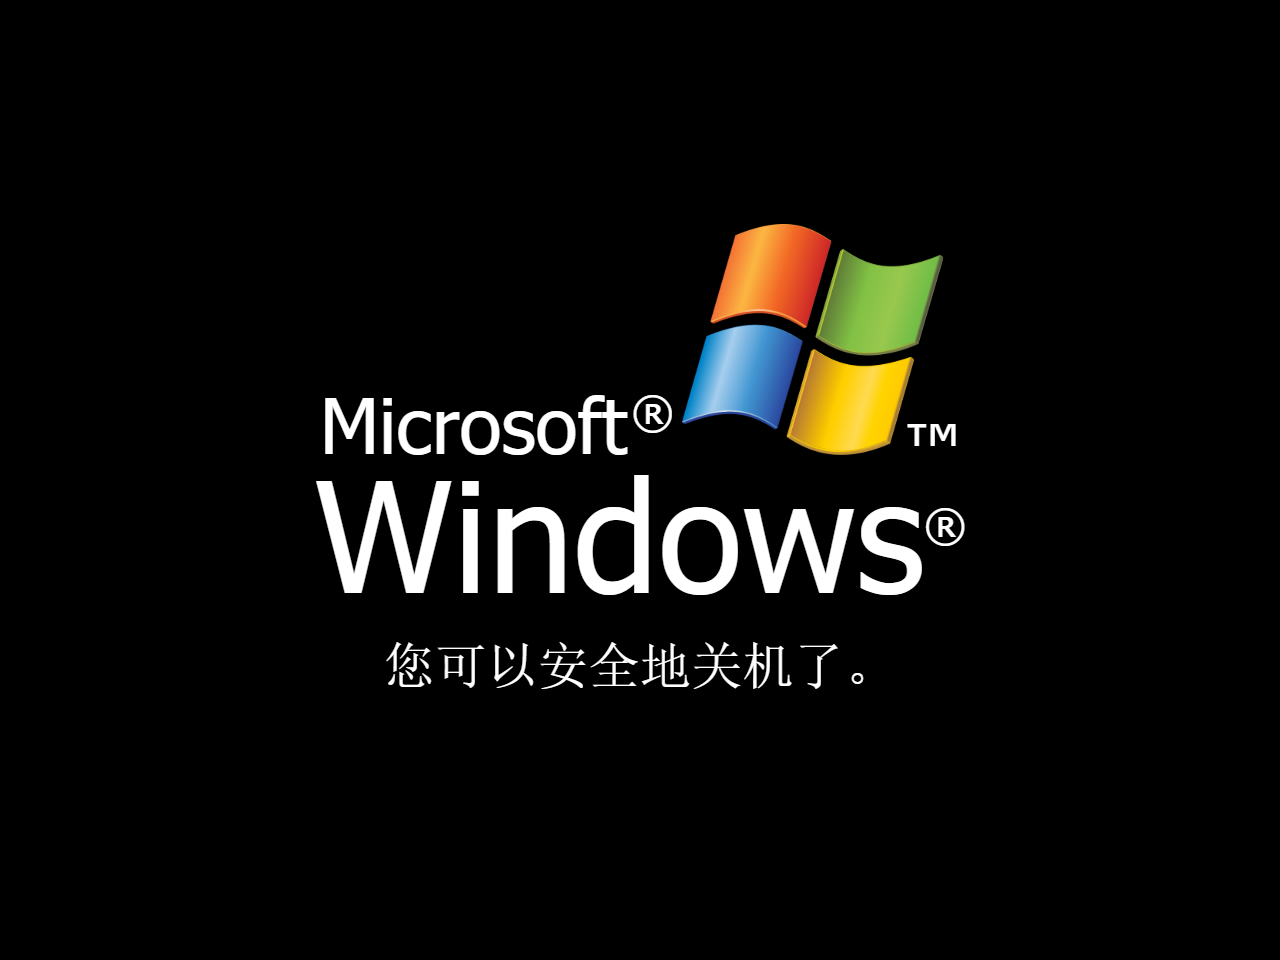 It is now safe to turn off your computer. The version in Windows XP in Chinese. The screen has the logo of Windows XP and the name of Microsoft Windows. Text in Tahoma or Song Ti and white, centered.